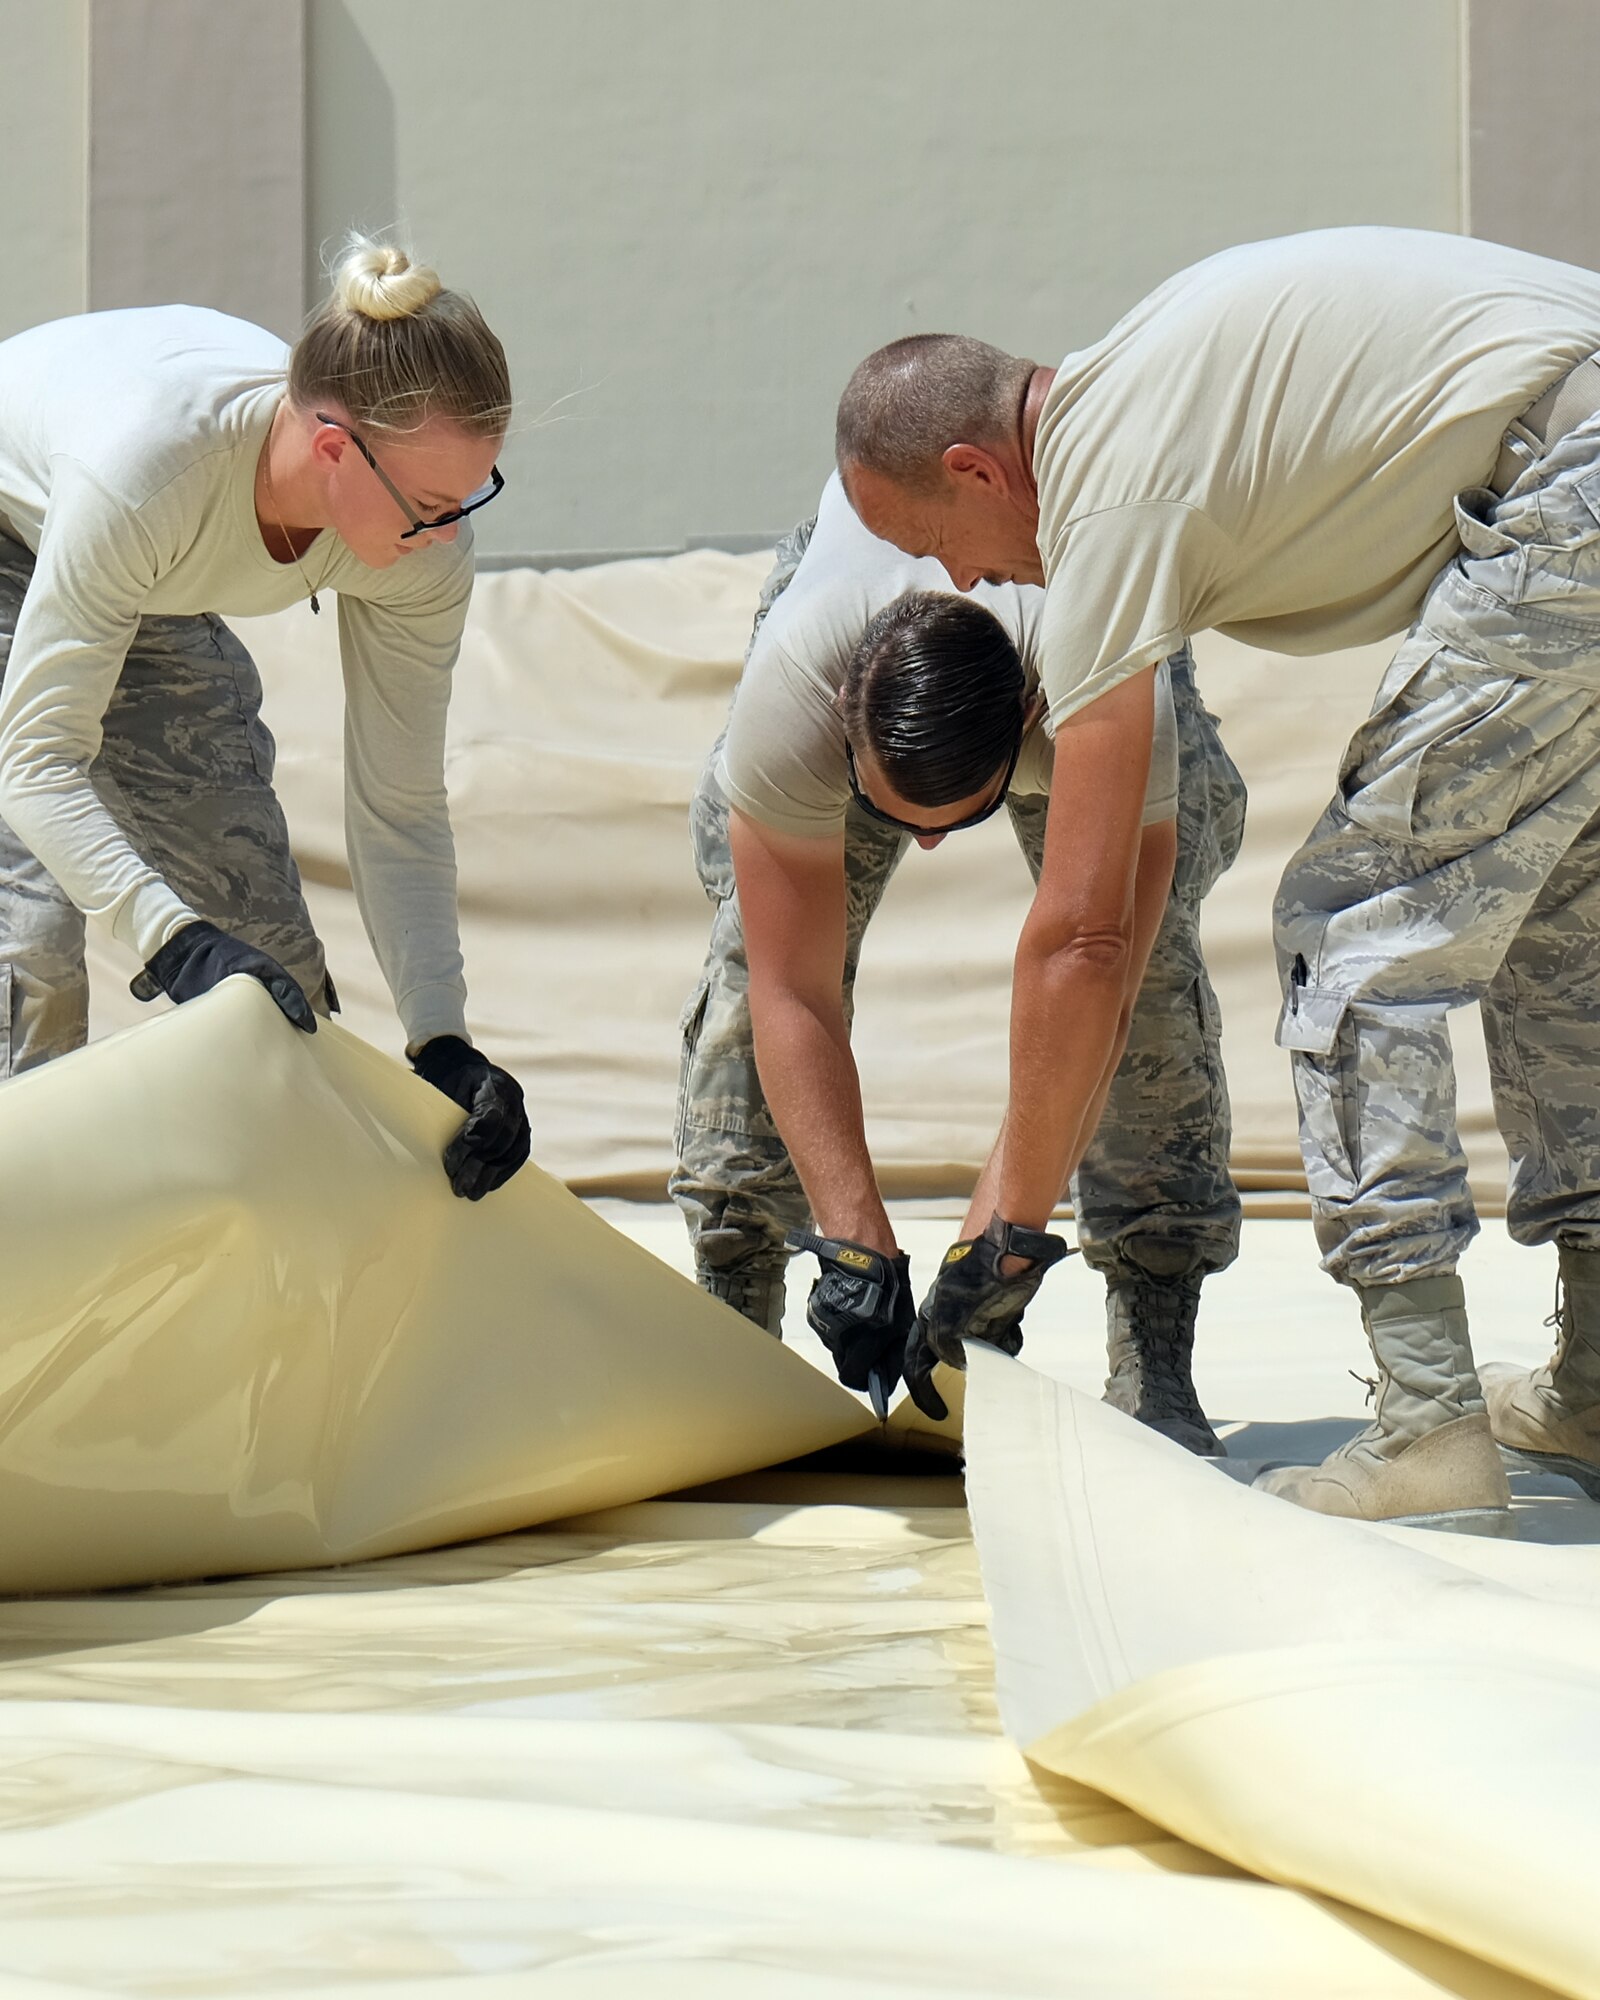 380th Expeditionary Logistics Readiness Squadron fuels management Airmen cut open a fuel bladder Aug. 4, 2017, at Al Dhafra Air Base, United Arab Emirates.